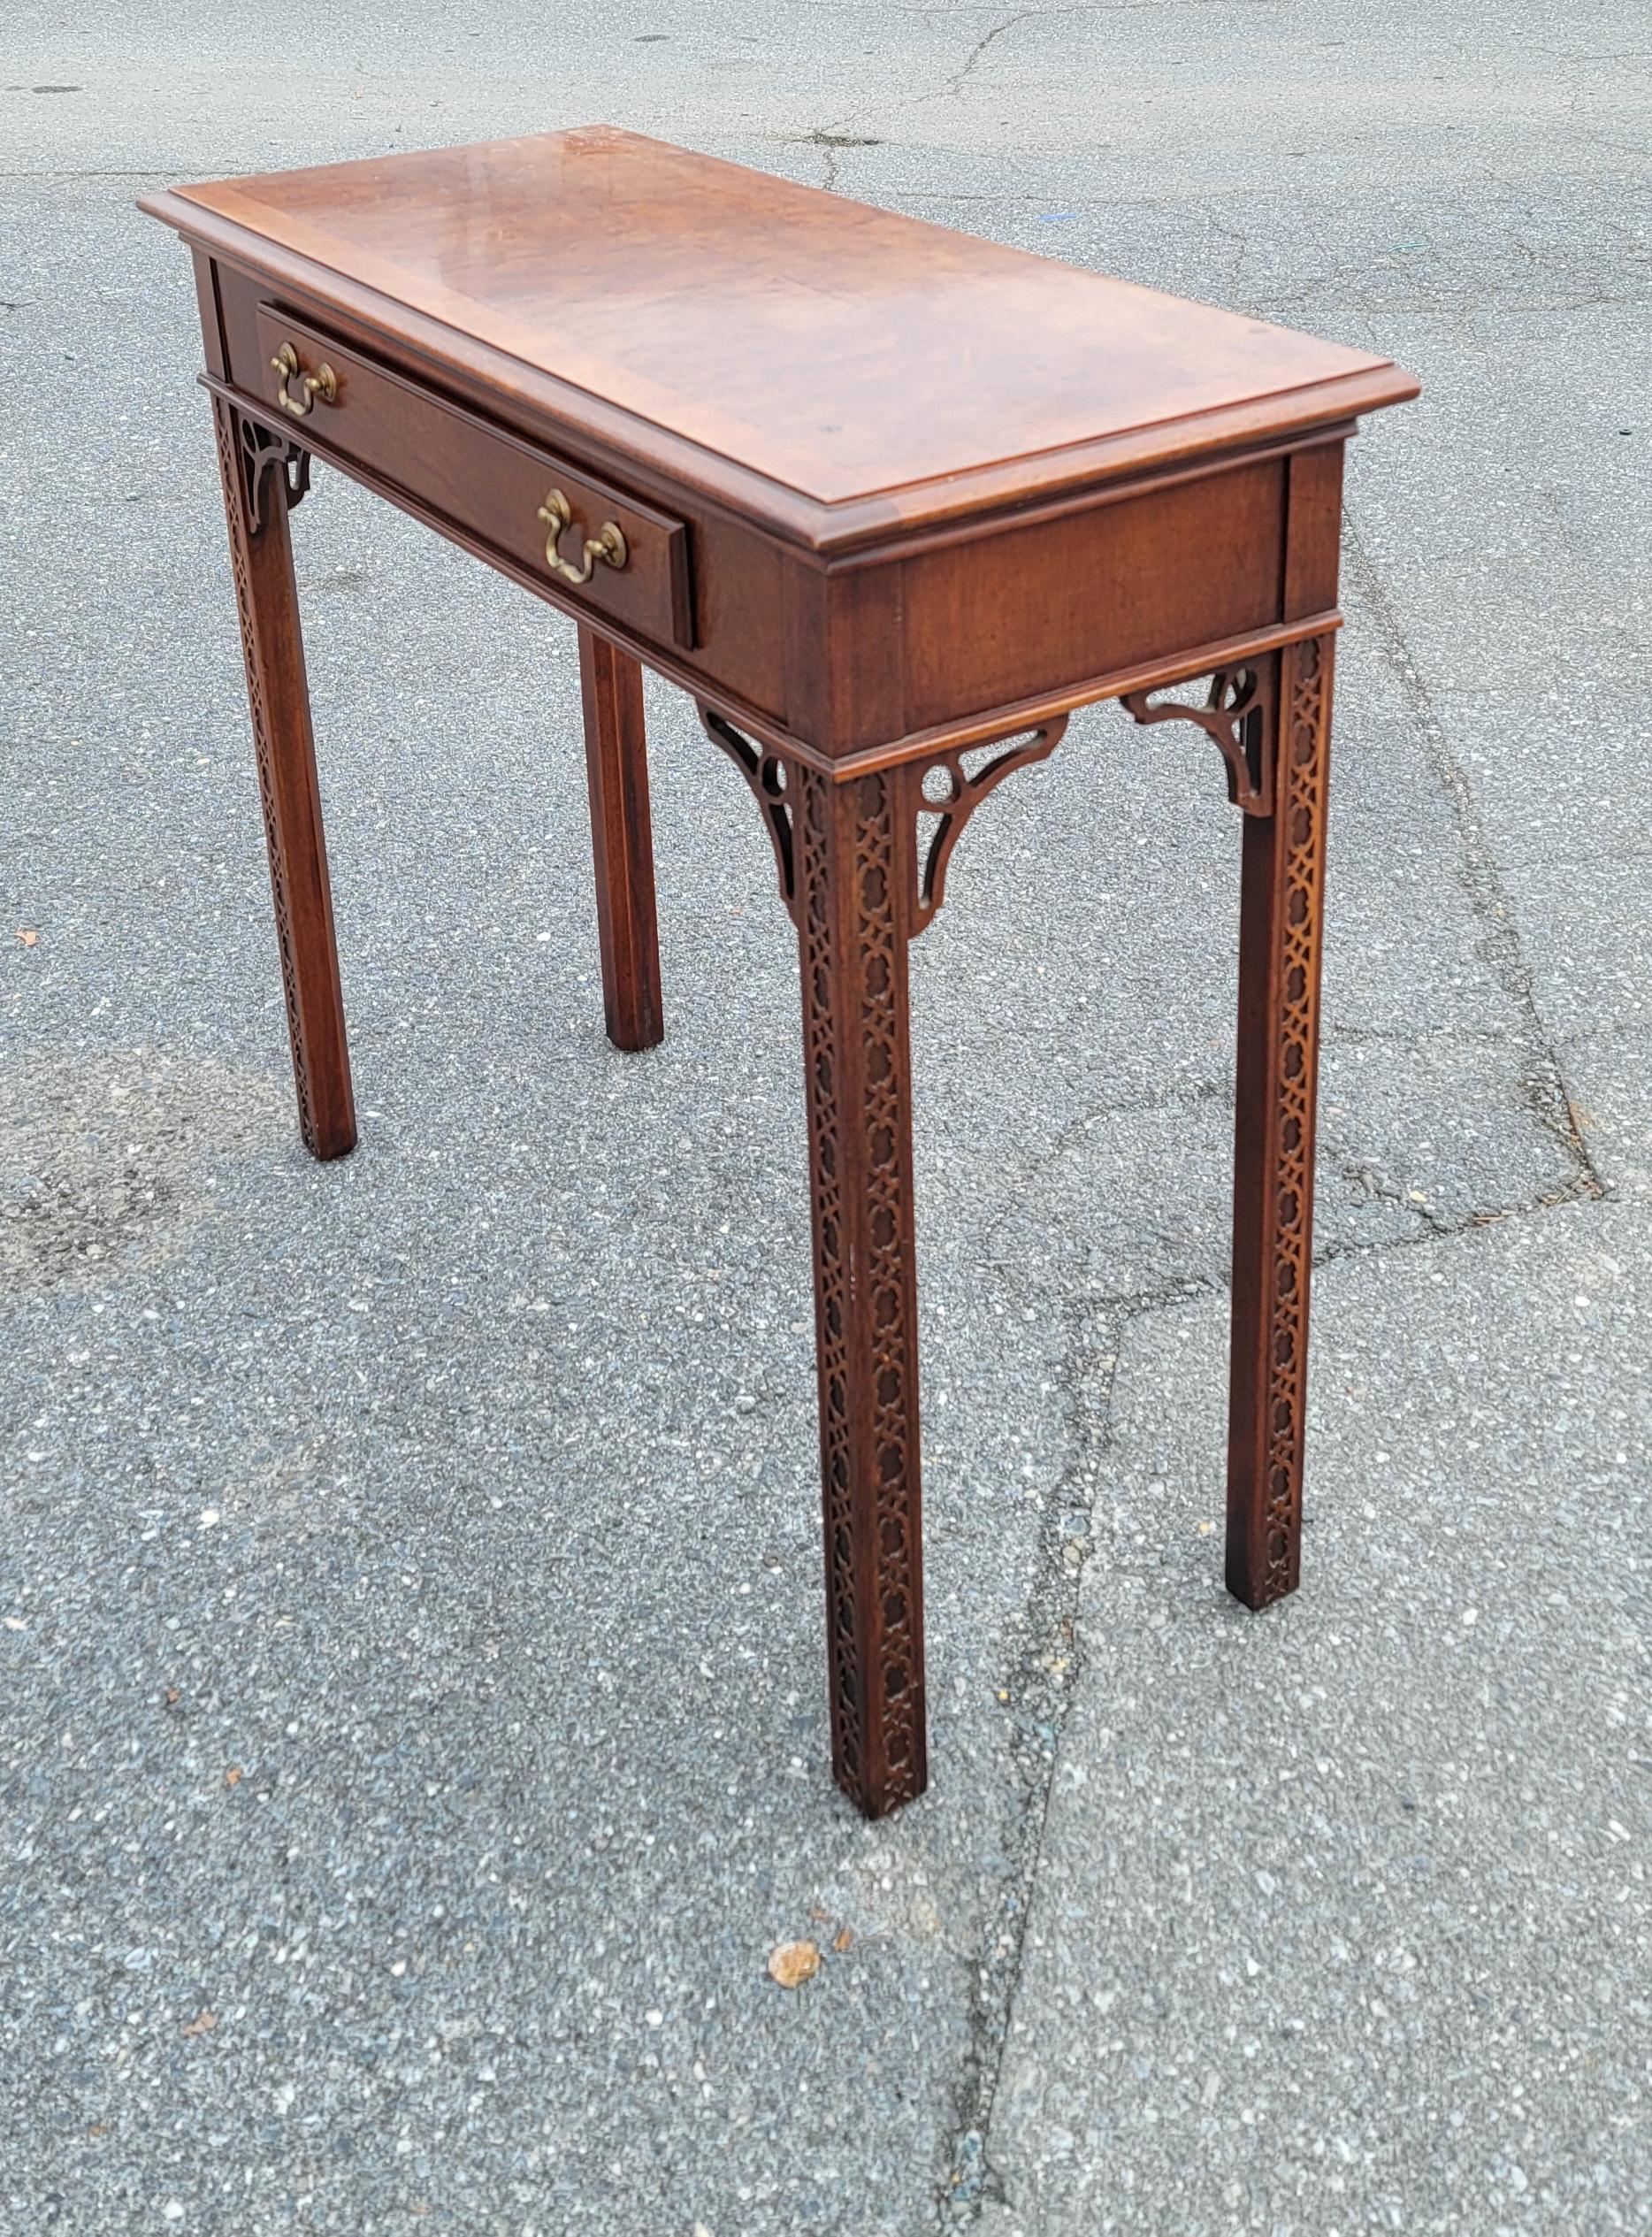 1970s Chippendale Walnut Burl Console Table with Fretwork and Banded Top For Sale 5